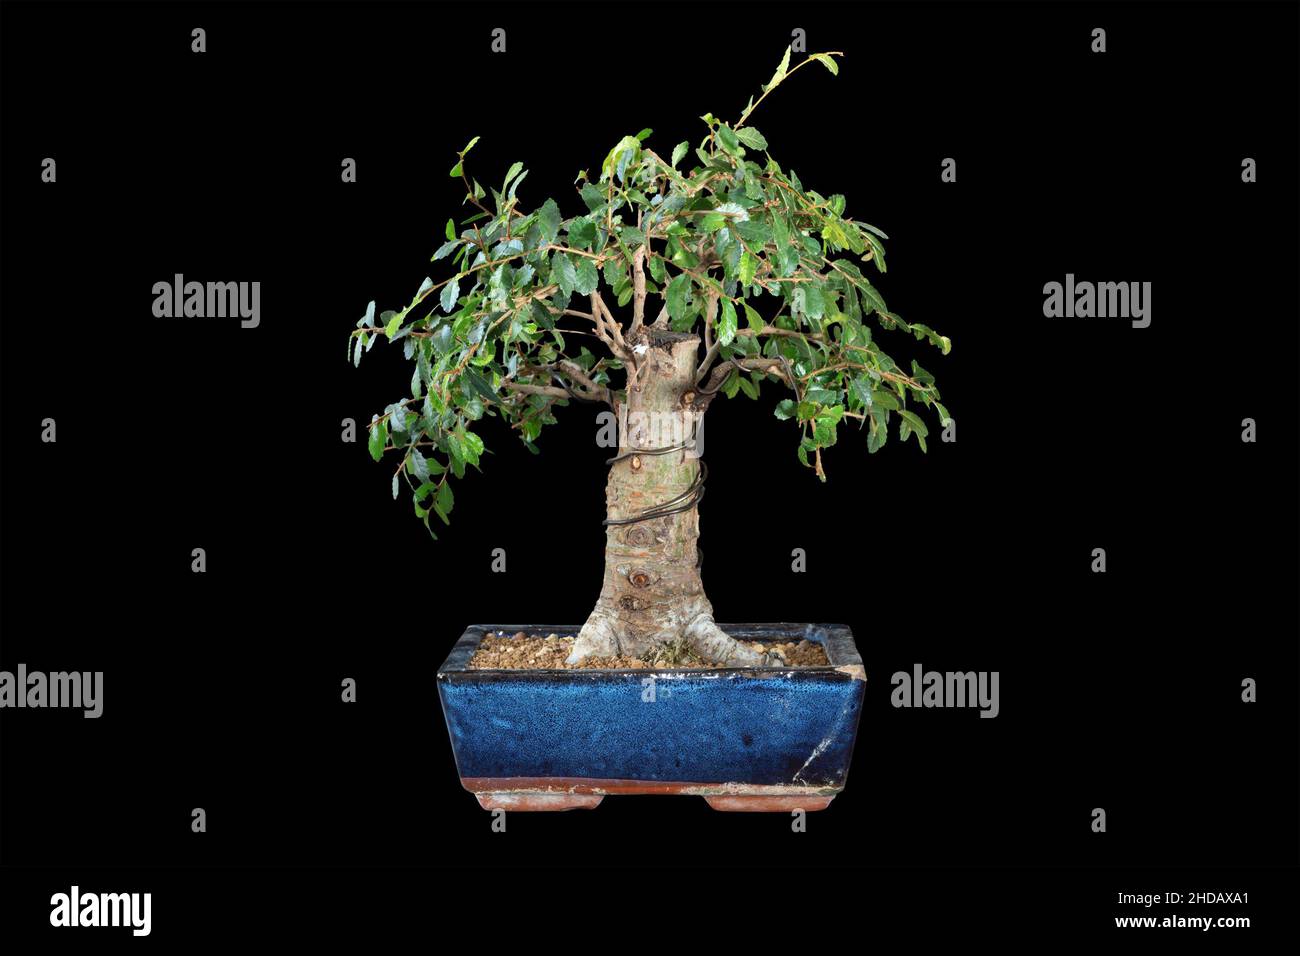 chinese elm bonsai isolated on dark background, planted in a blue glazed ceramic pot (Ulmus parvifolia) Stock Photo